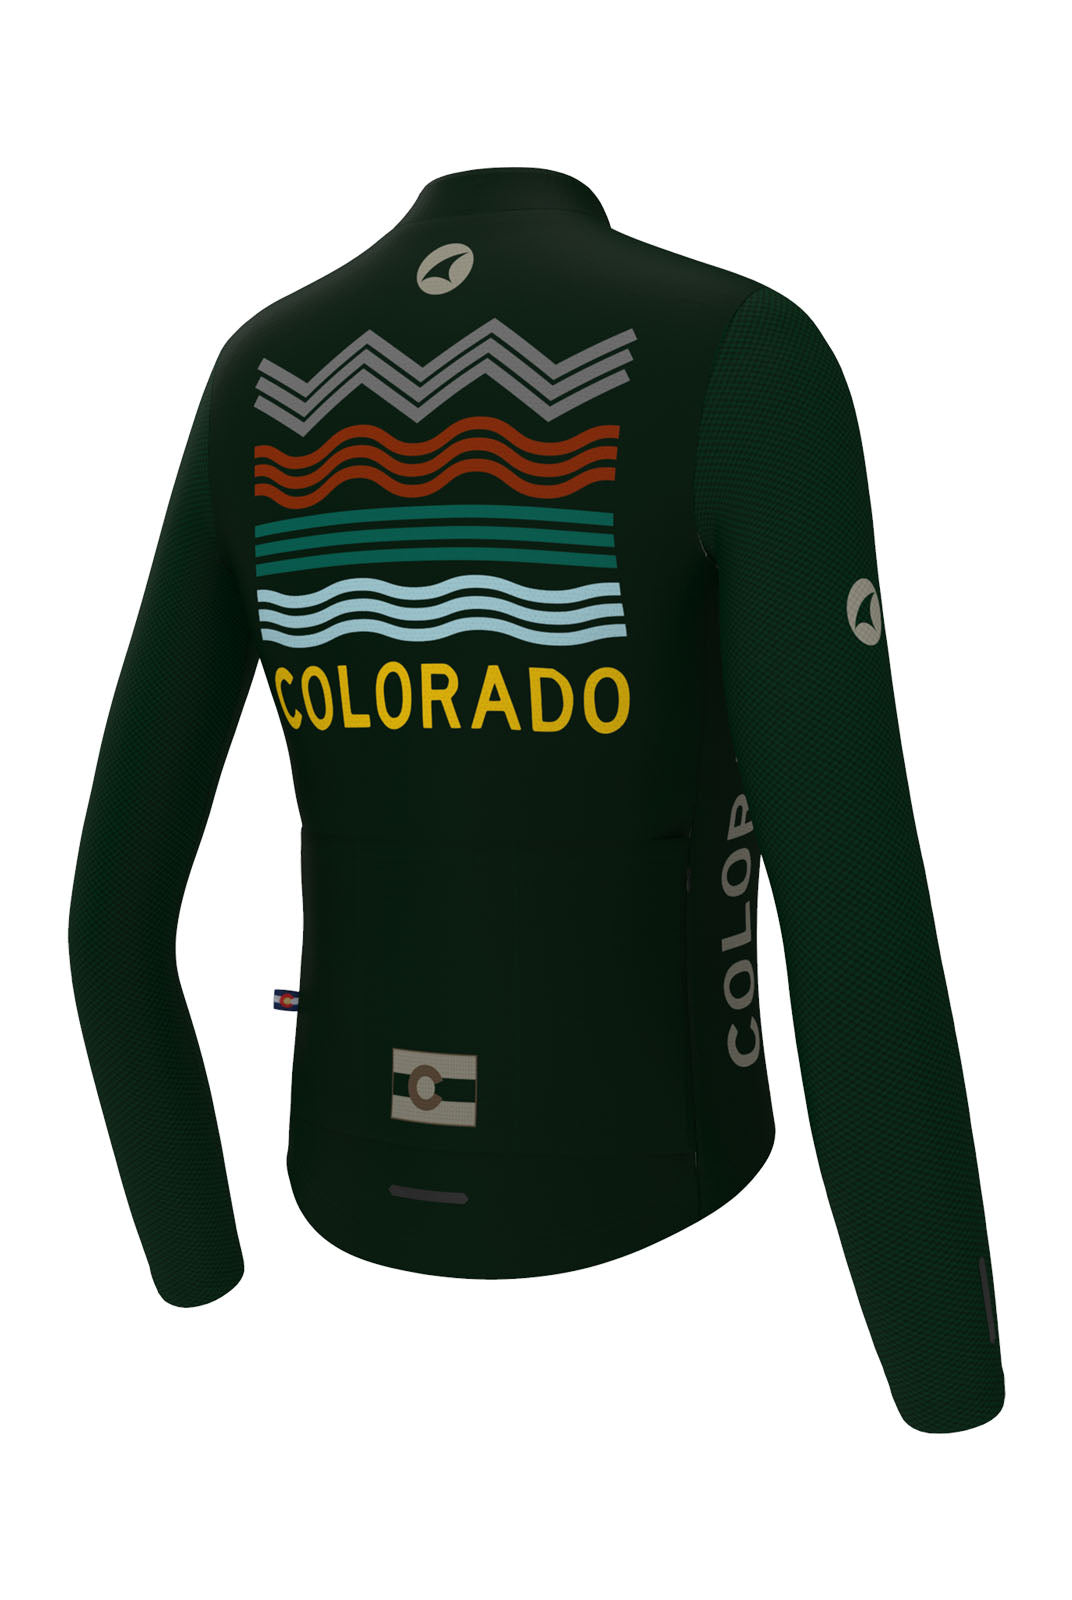 Women's Navy Blue Colorado Long Sleeve Cycling Jersey - Back View